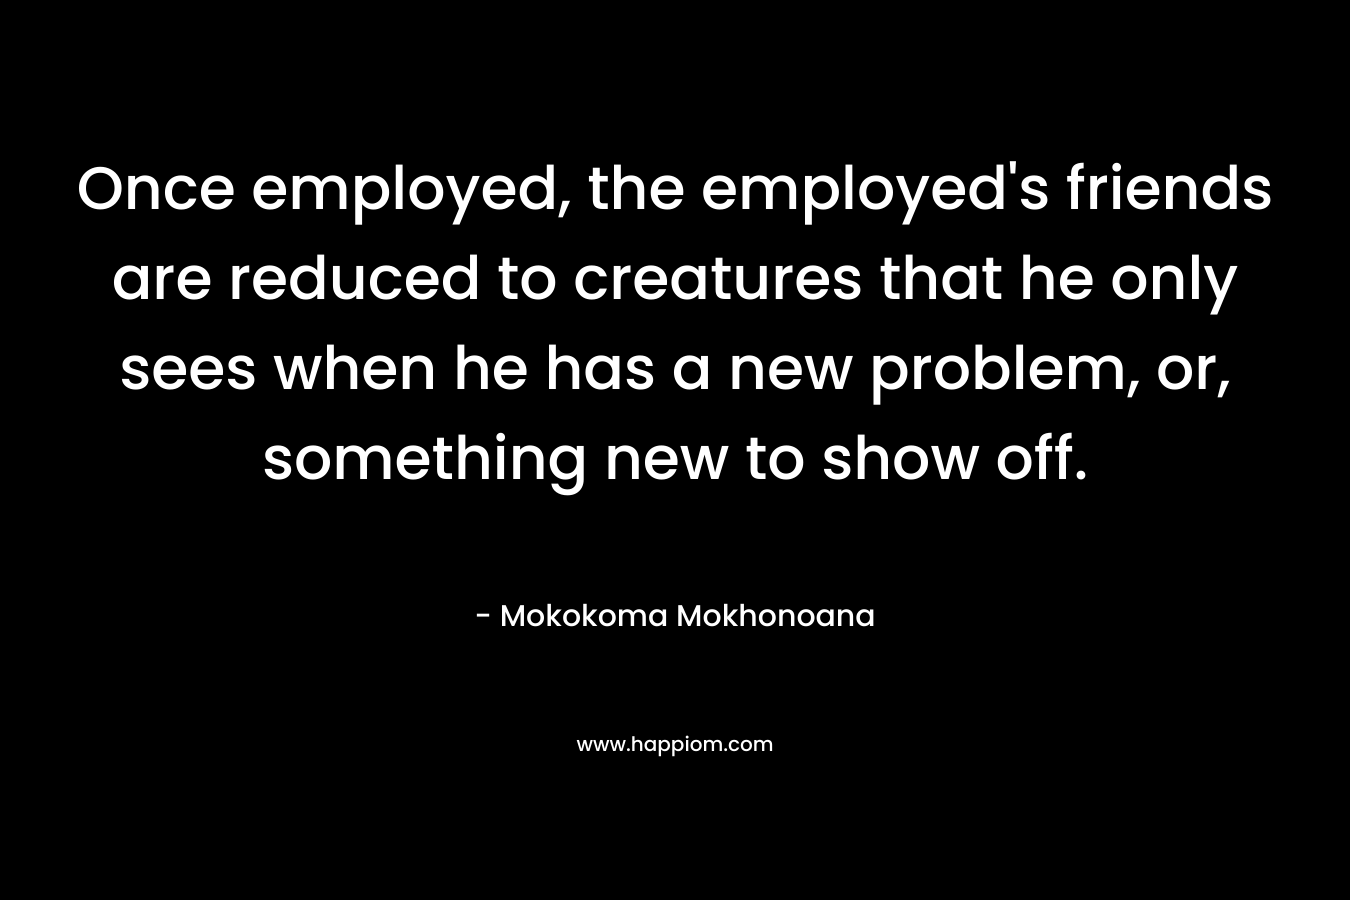 Once employed, the employed’s friends are reduced to creatures that he only sees when he has a new problem, or, something new to show off. – Mokokoma Mokhonoana